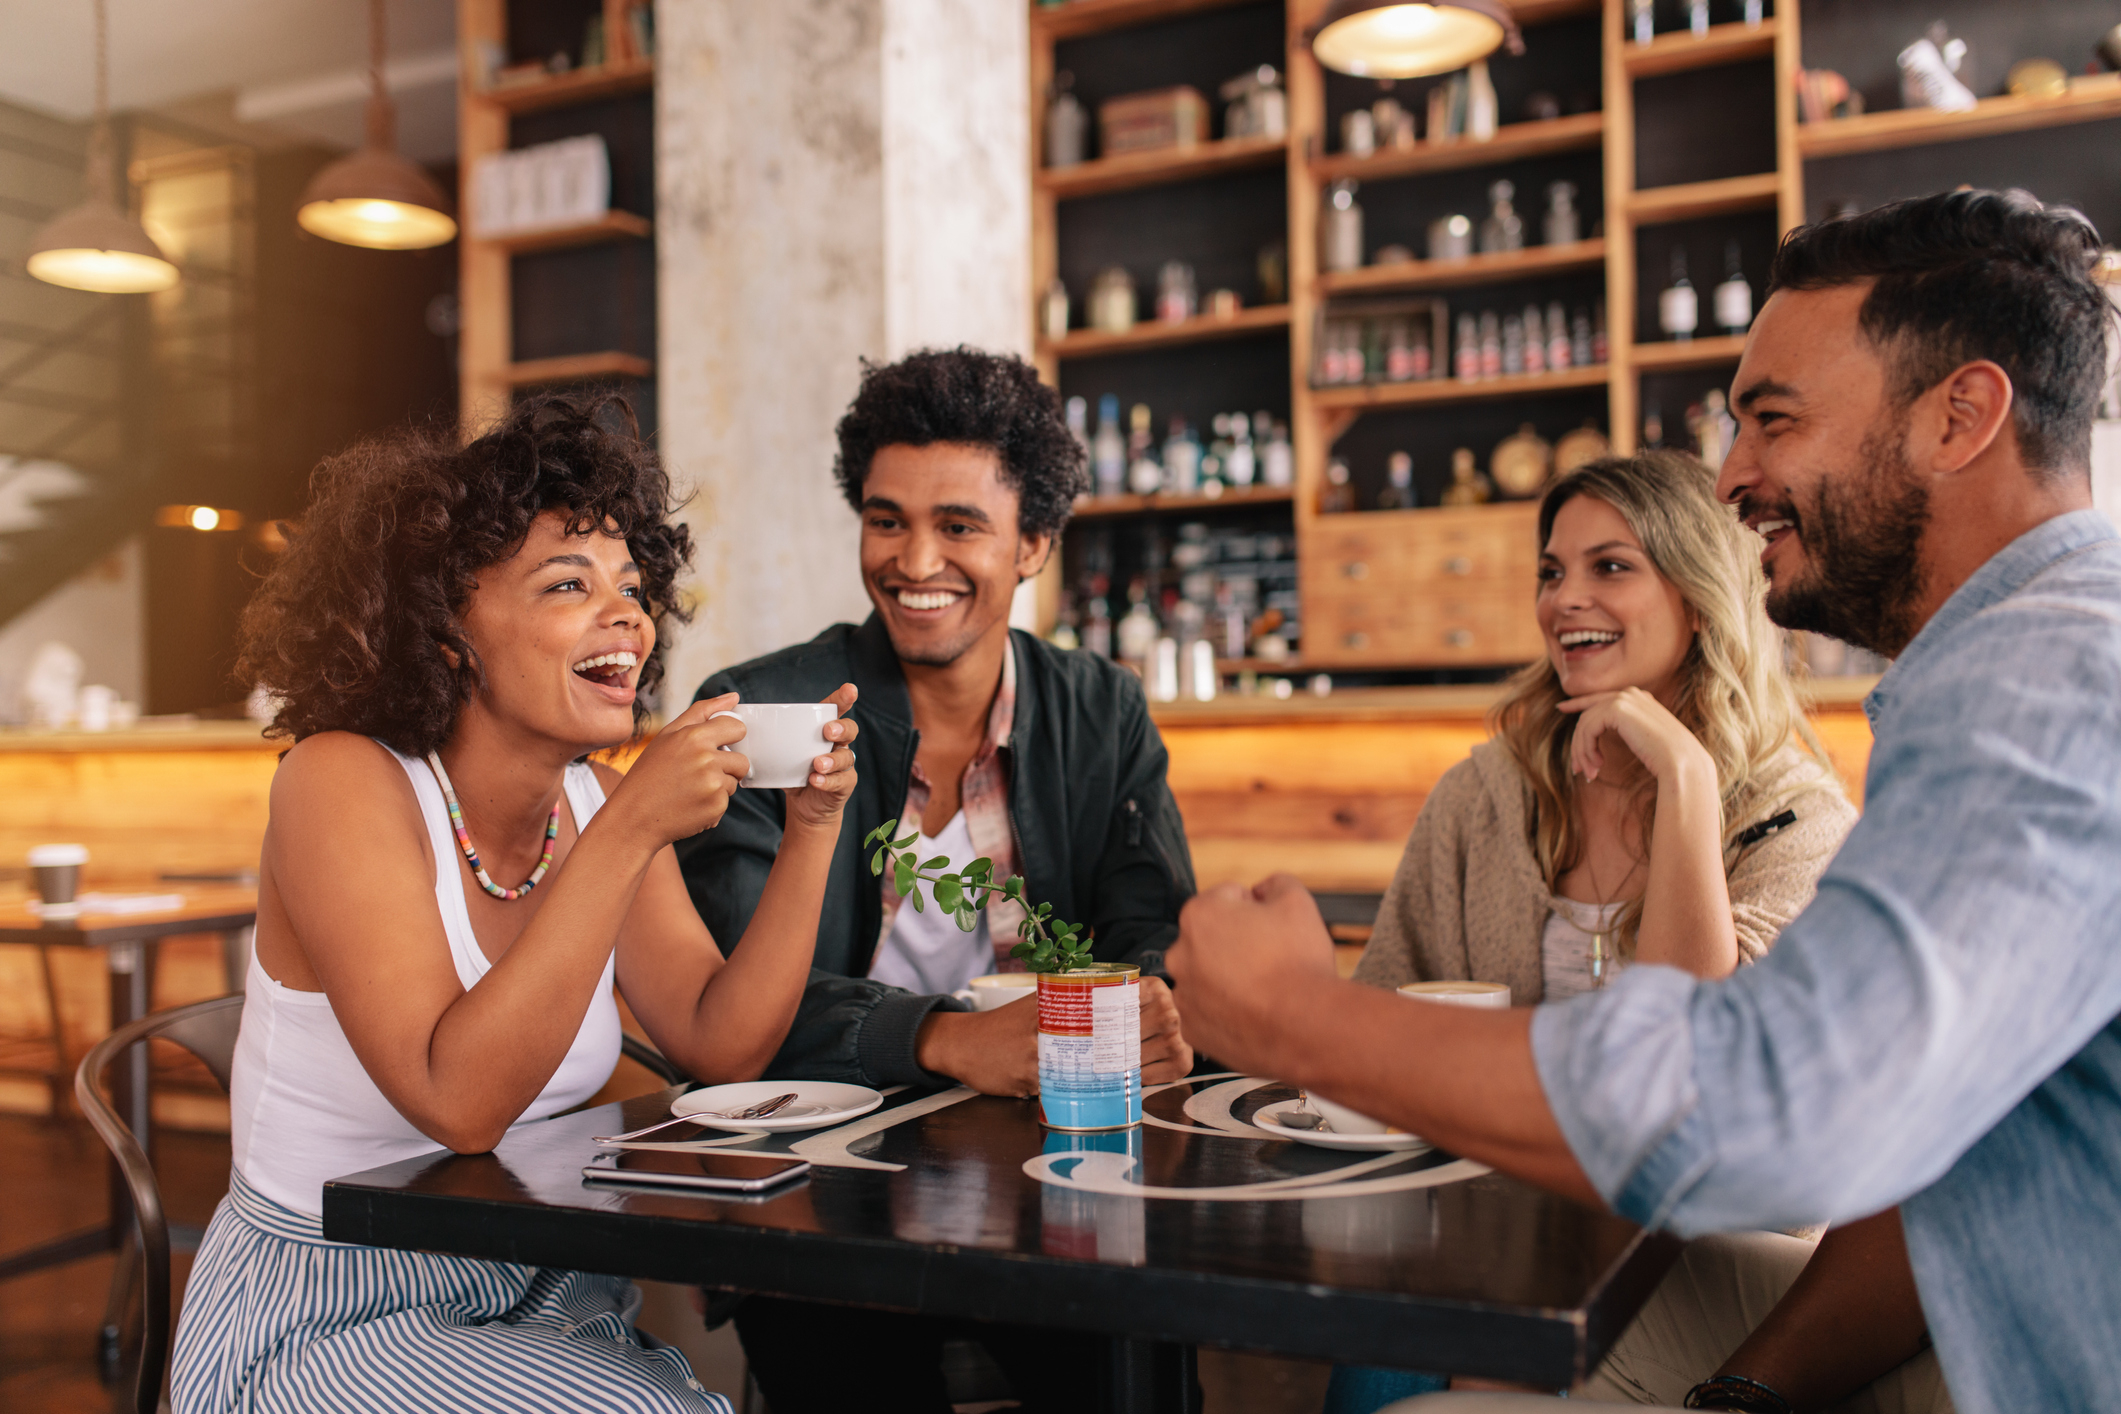 Four friends laughing and enjoying coffee together at a cafe table